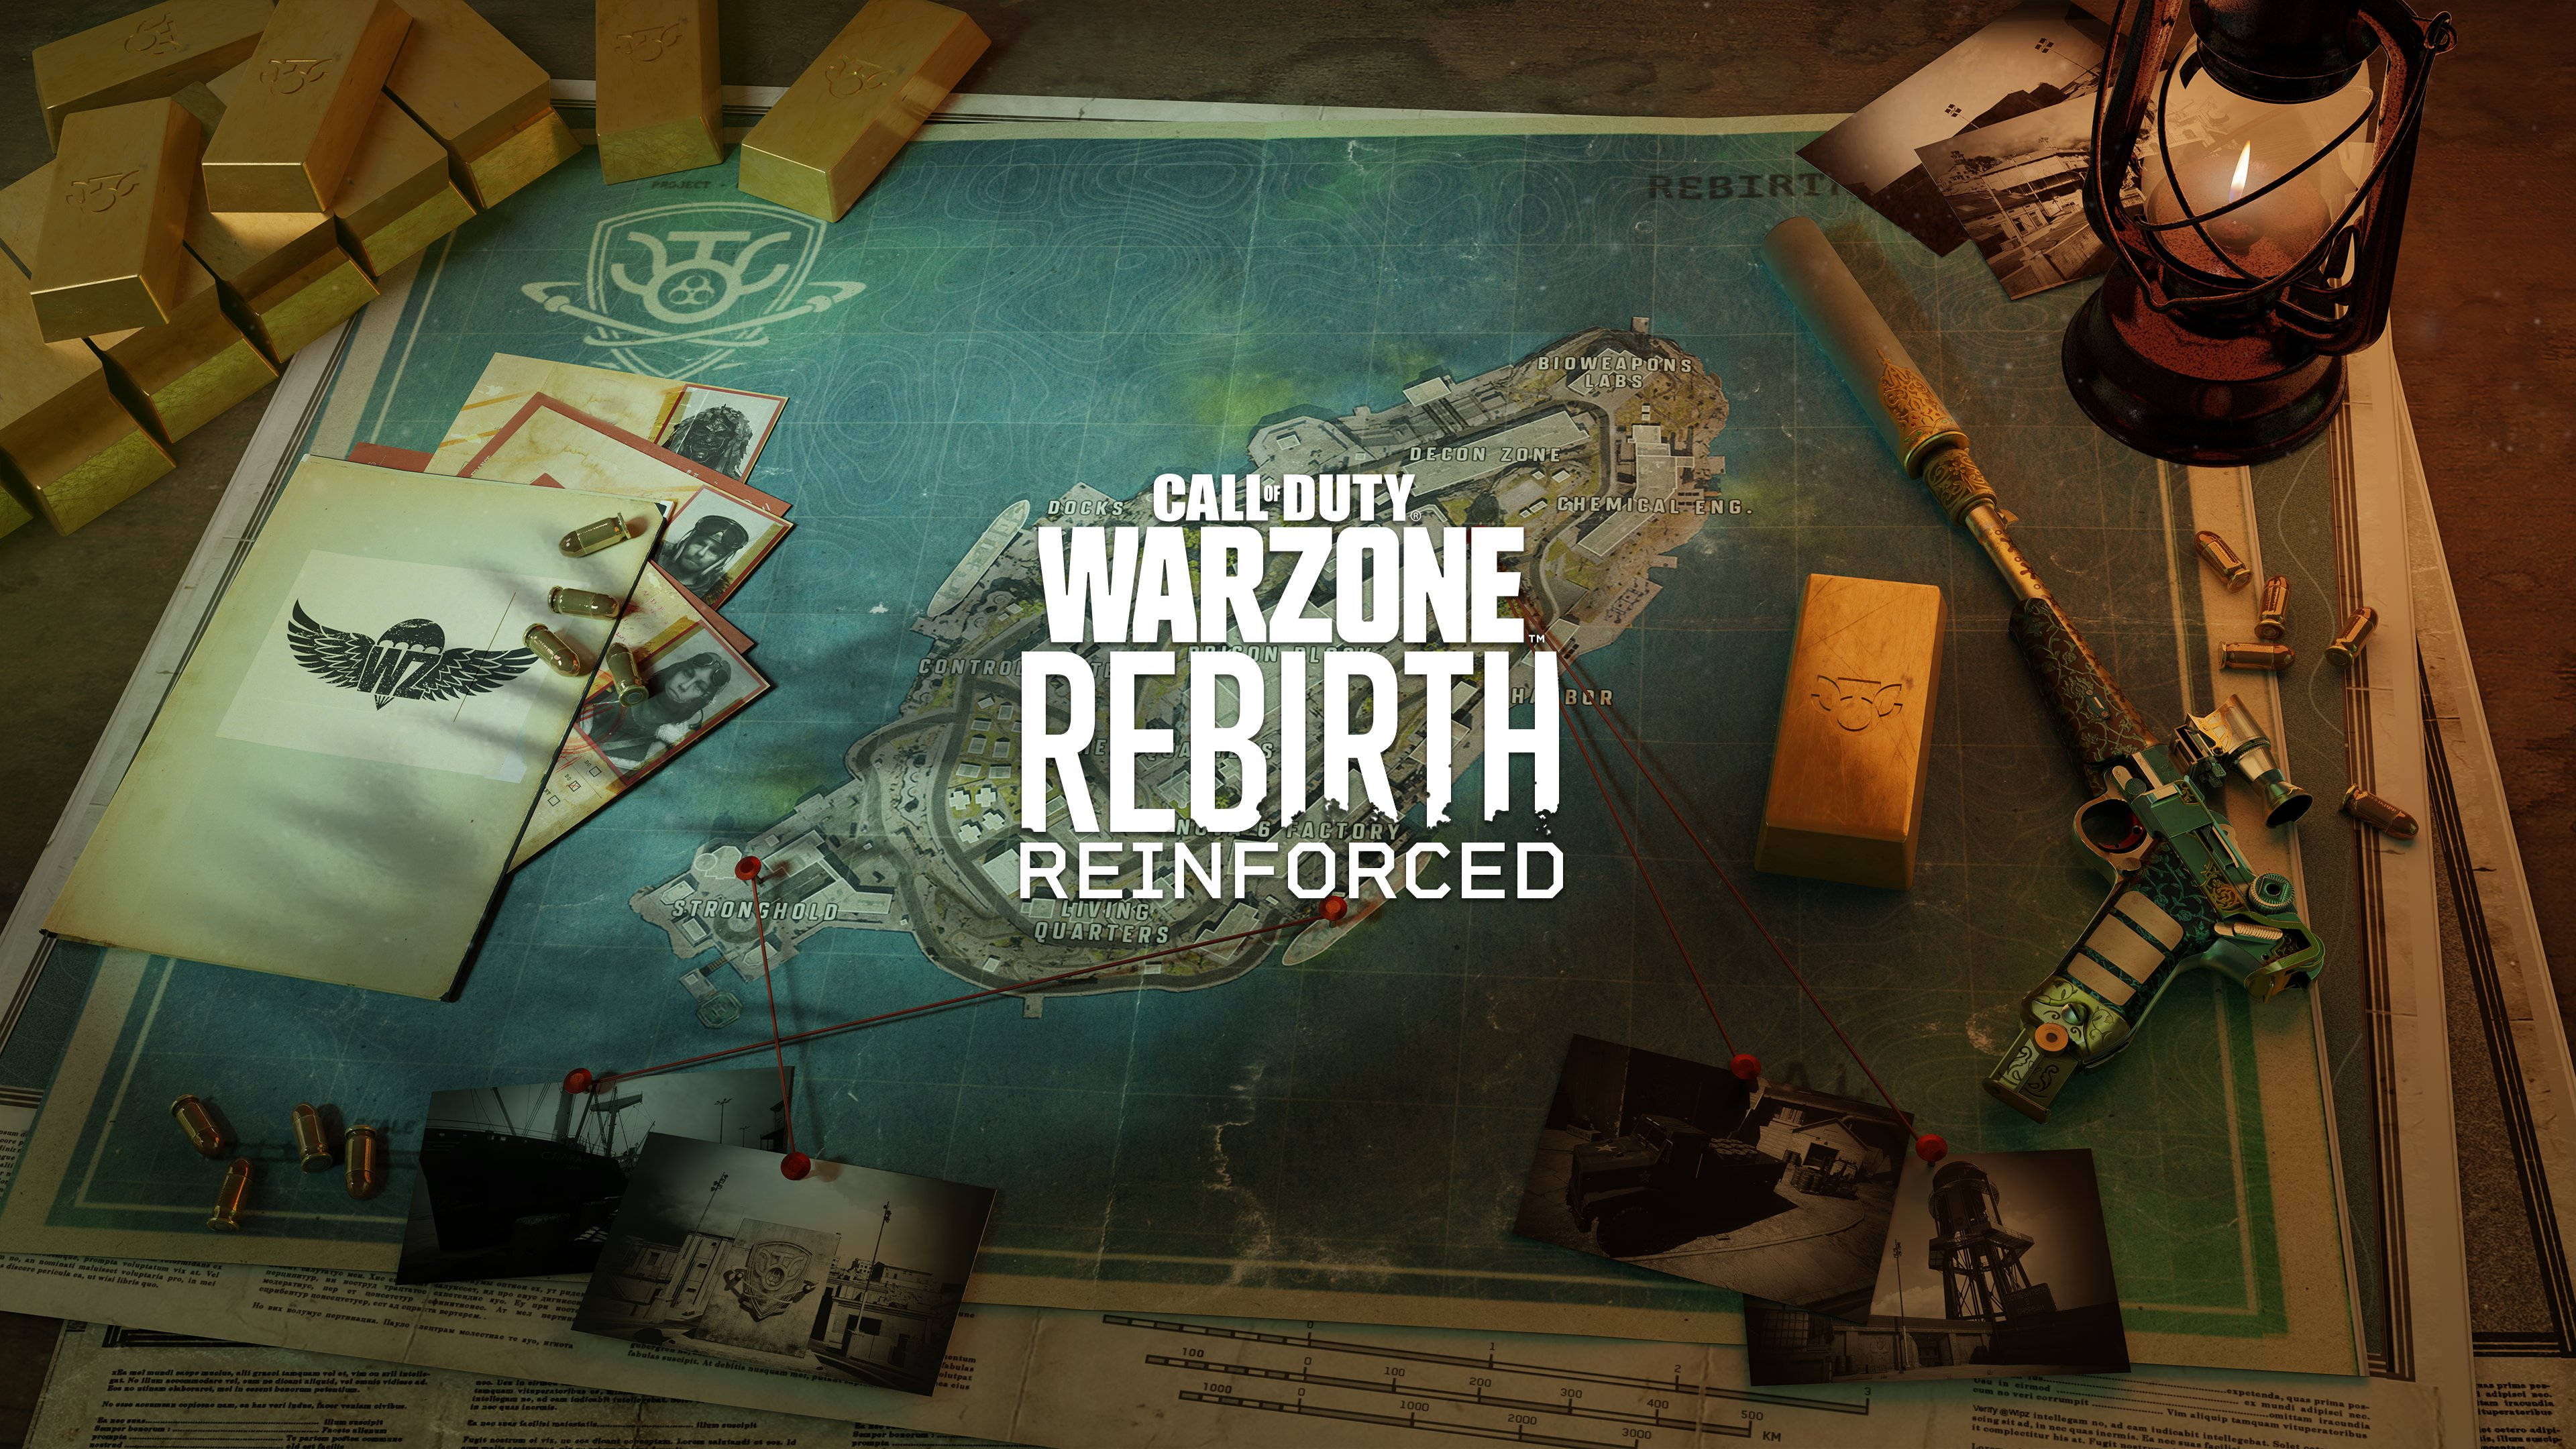 Rebirth Island Rework is coming to Warzone - What we know so far - CoD